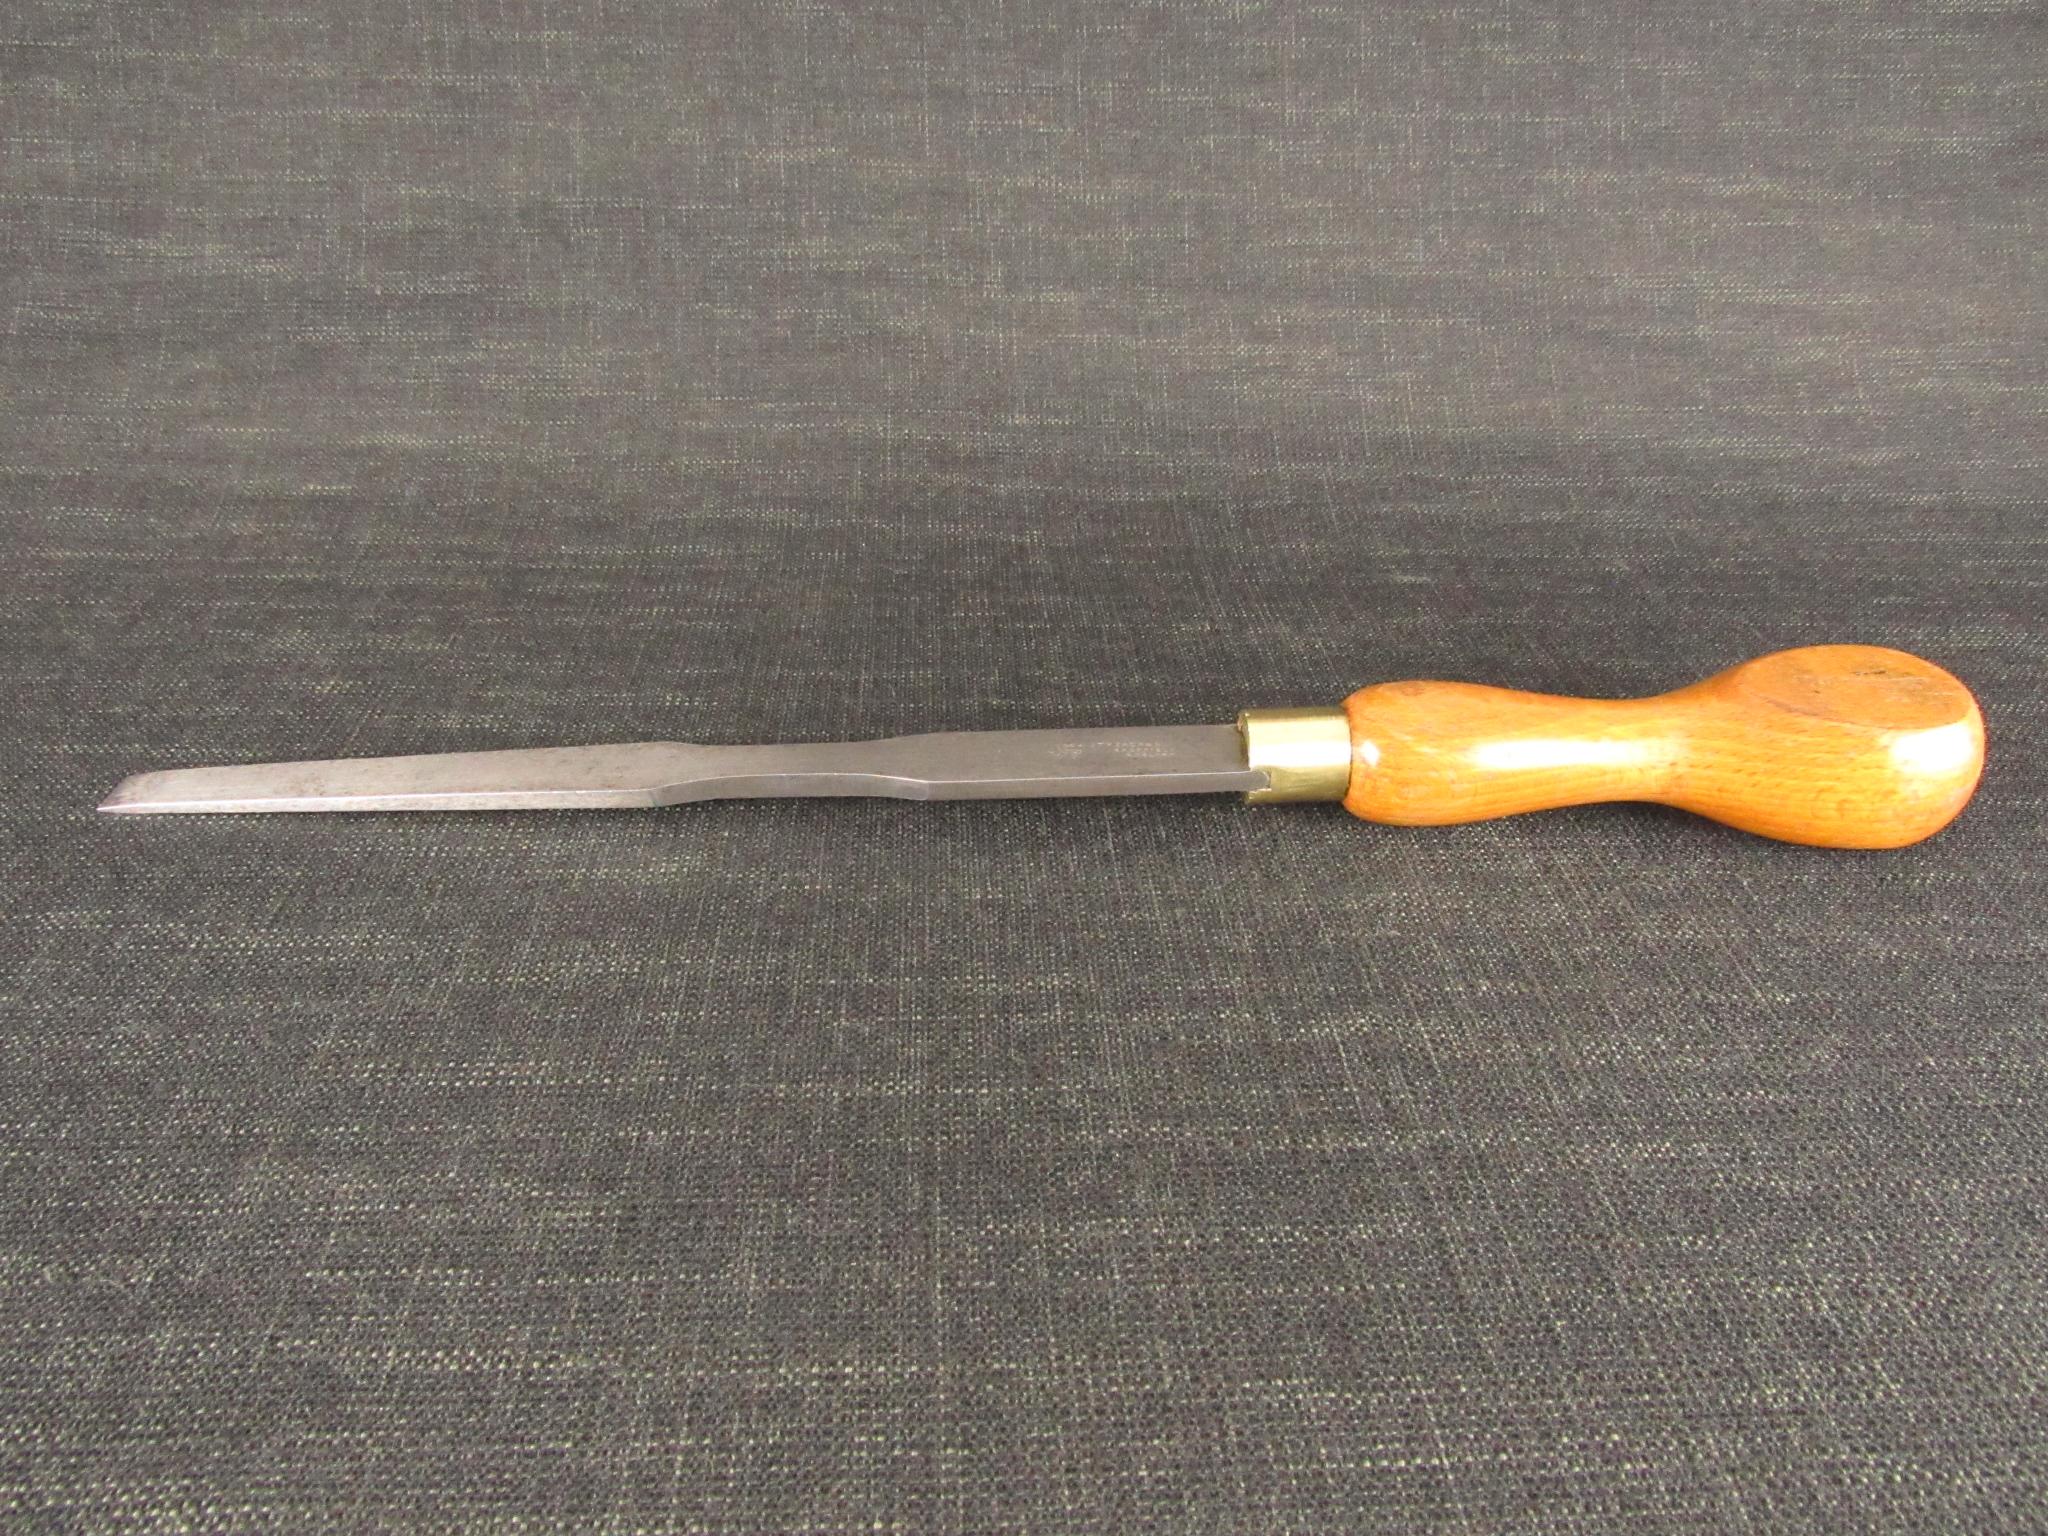 Large TYZACK Screwdriver or Turnscrew with Military Marks - 12 inch